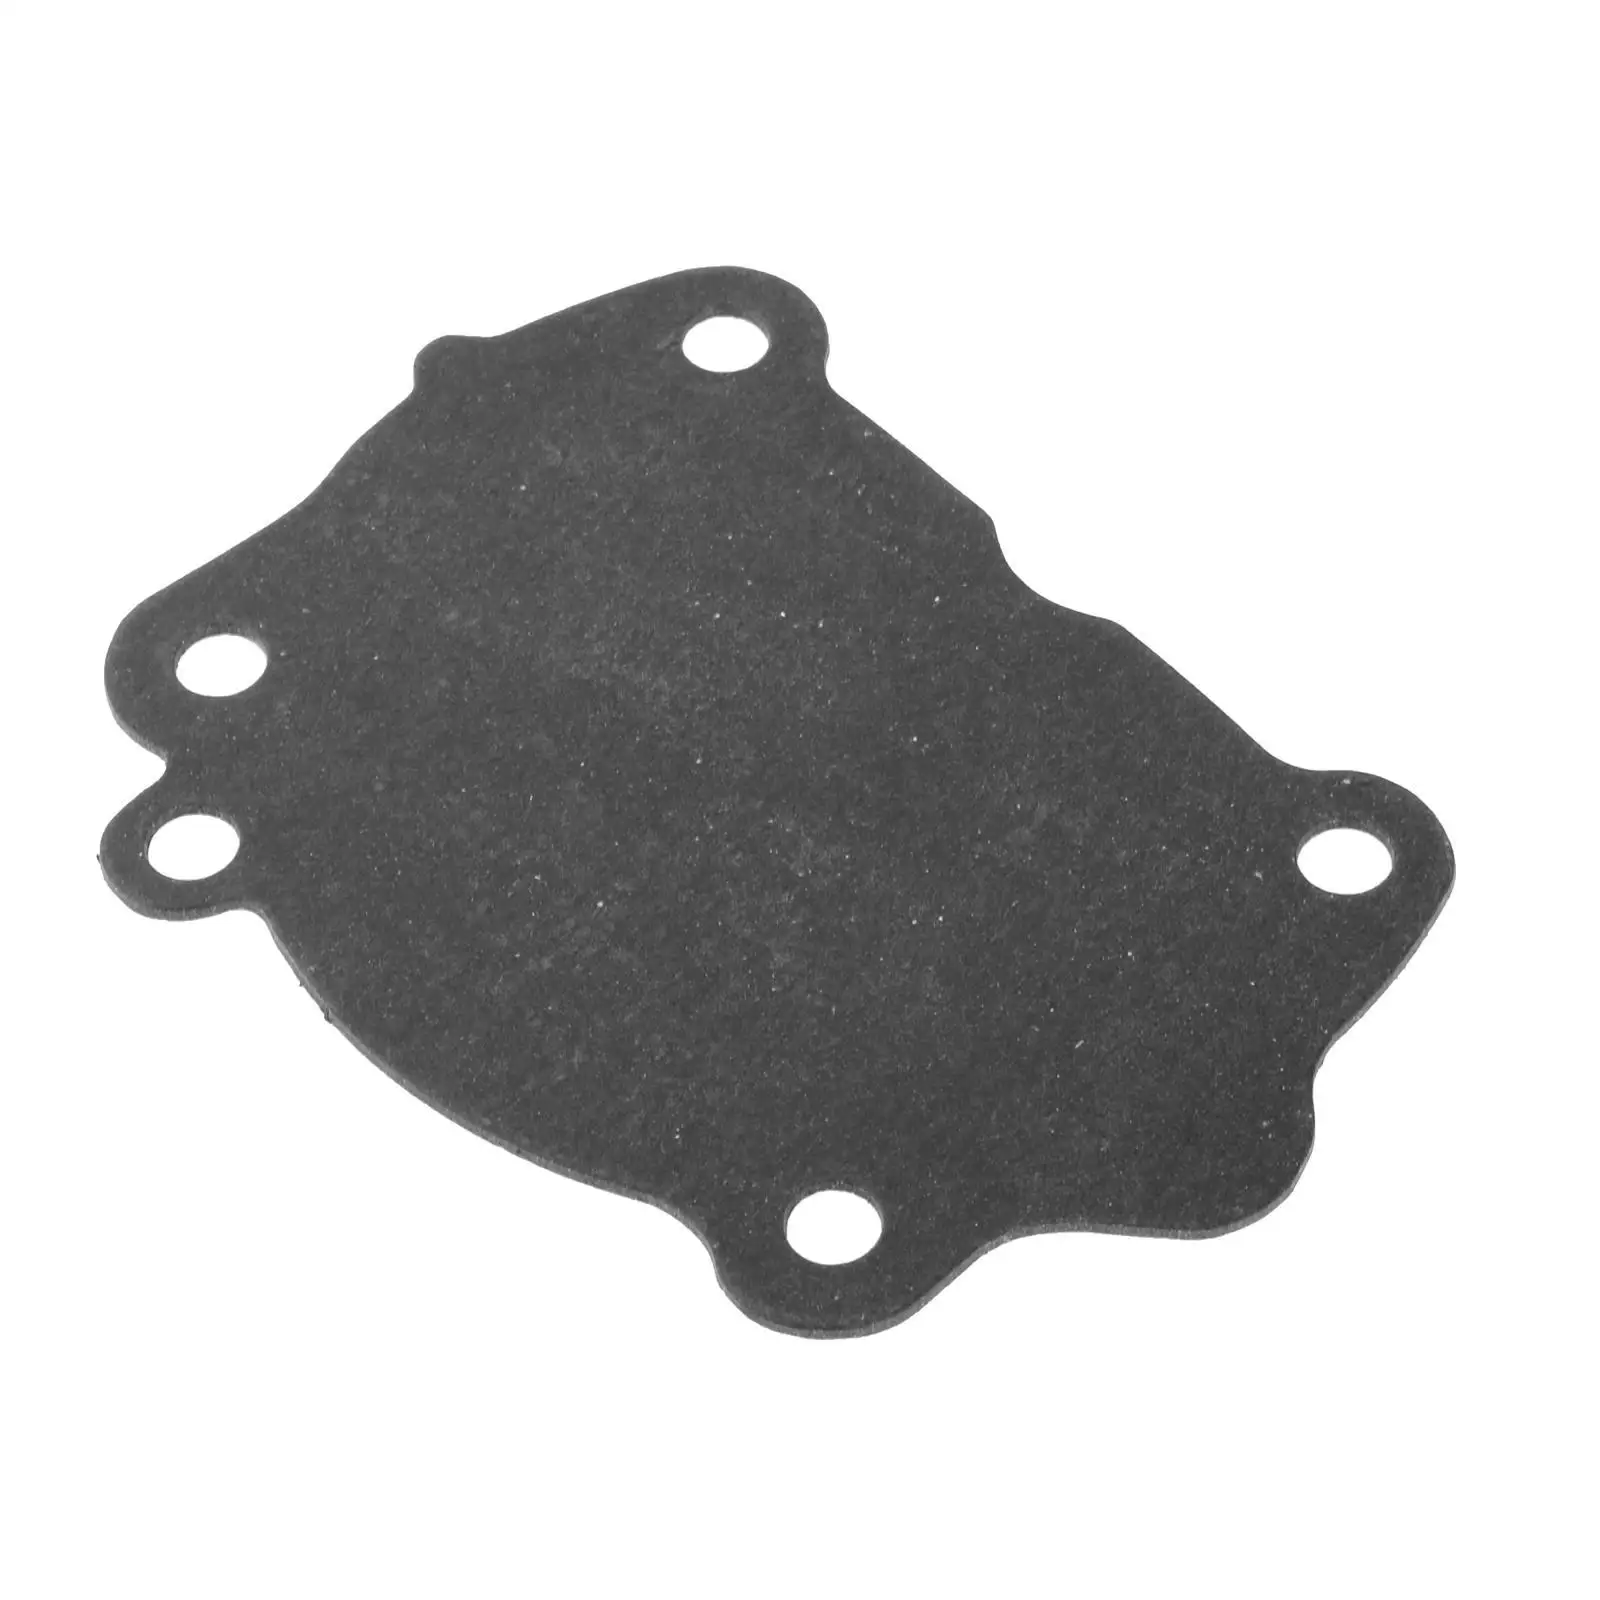 Cylinder Head Gasket High Performance Accessories Outboard Motor Easy to Install Fit for Yamaha 5Mlht 5Mlhu 6E3-11193-A1-00